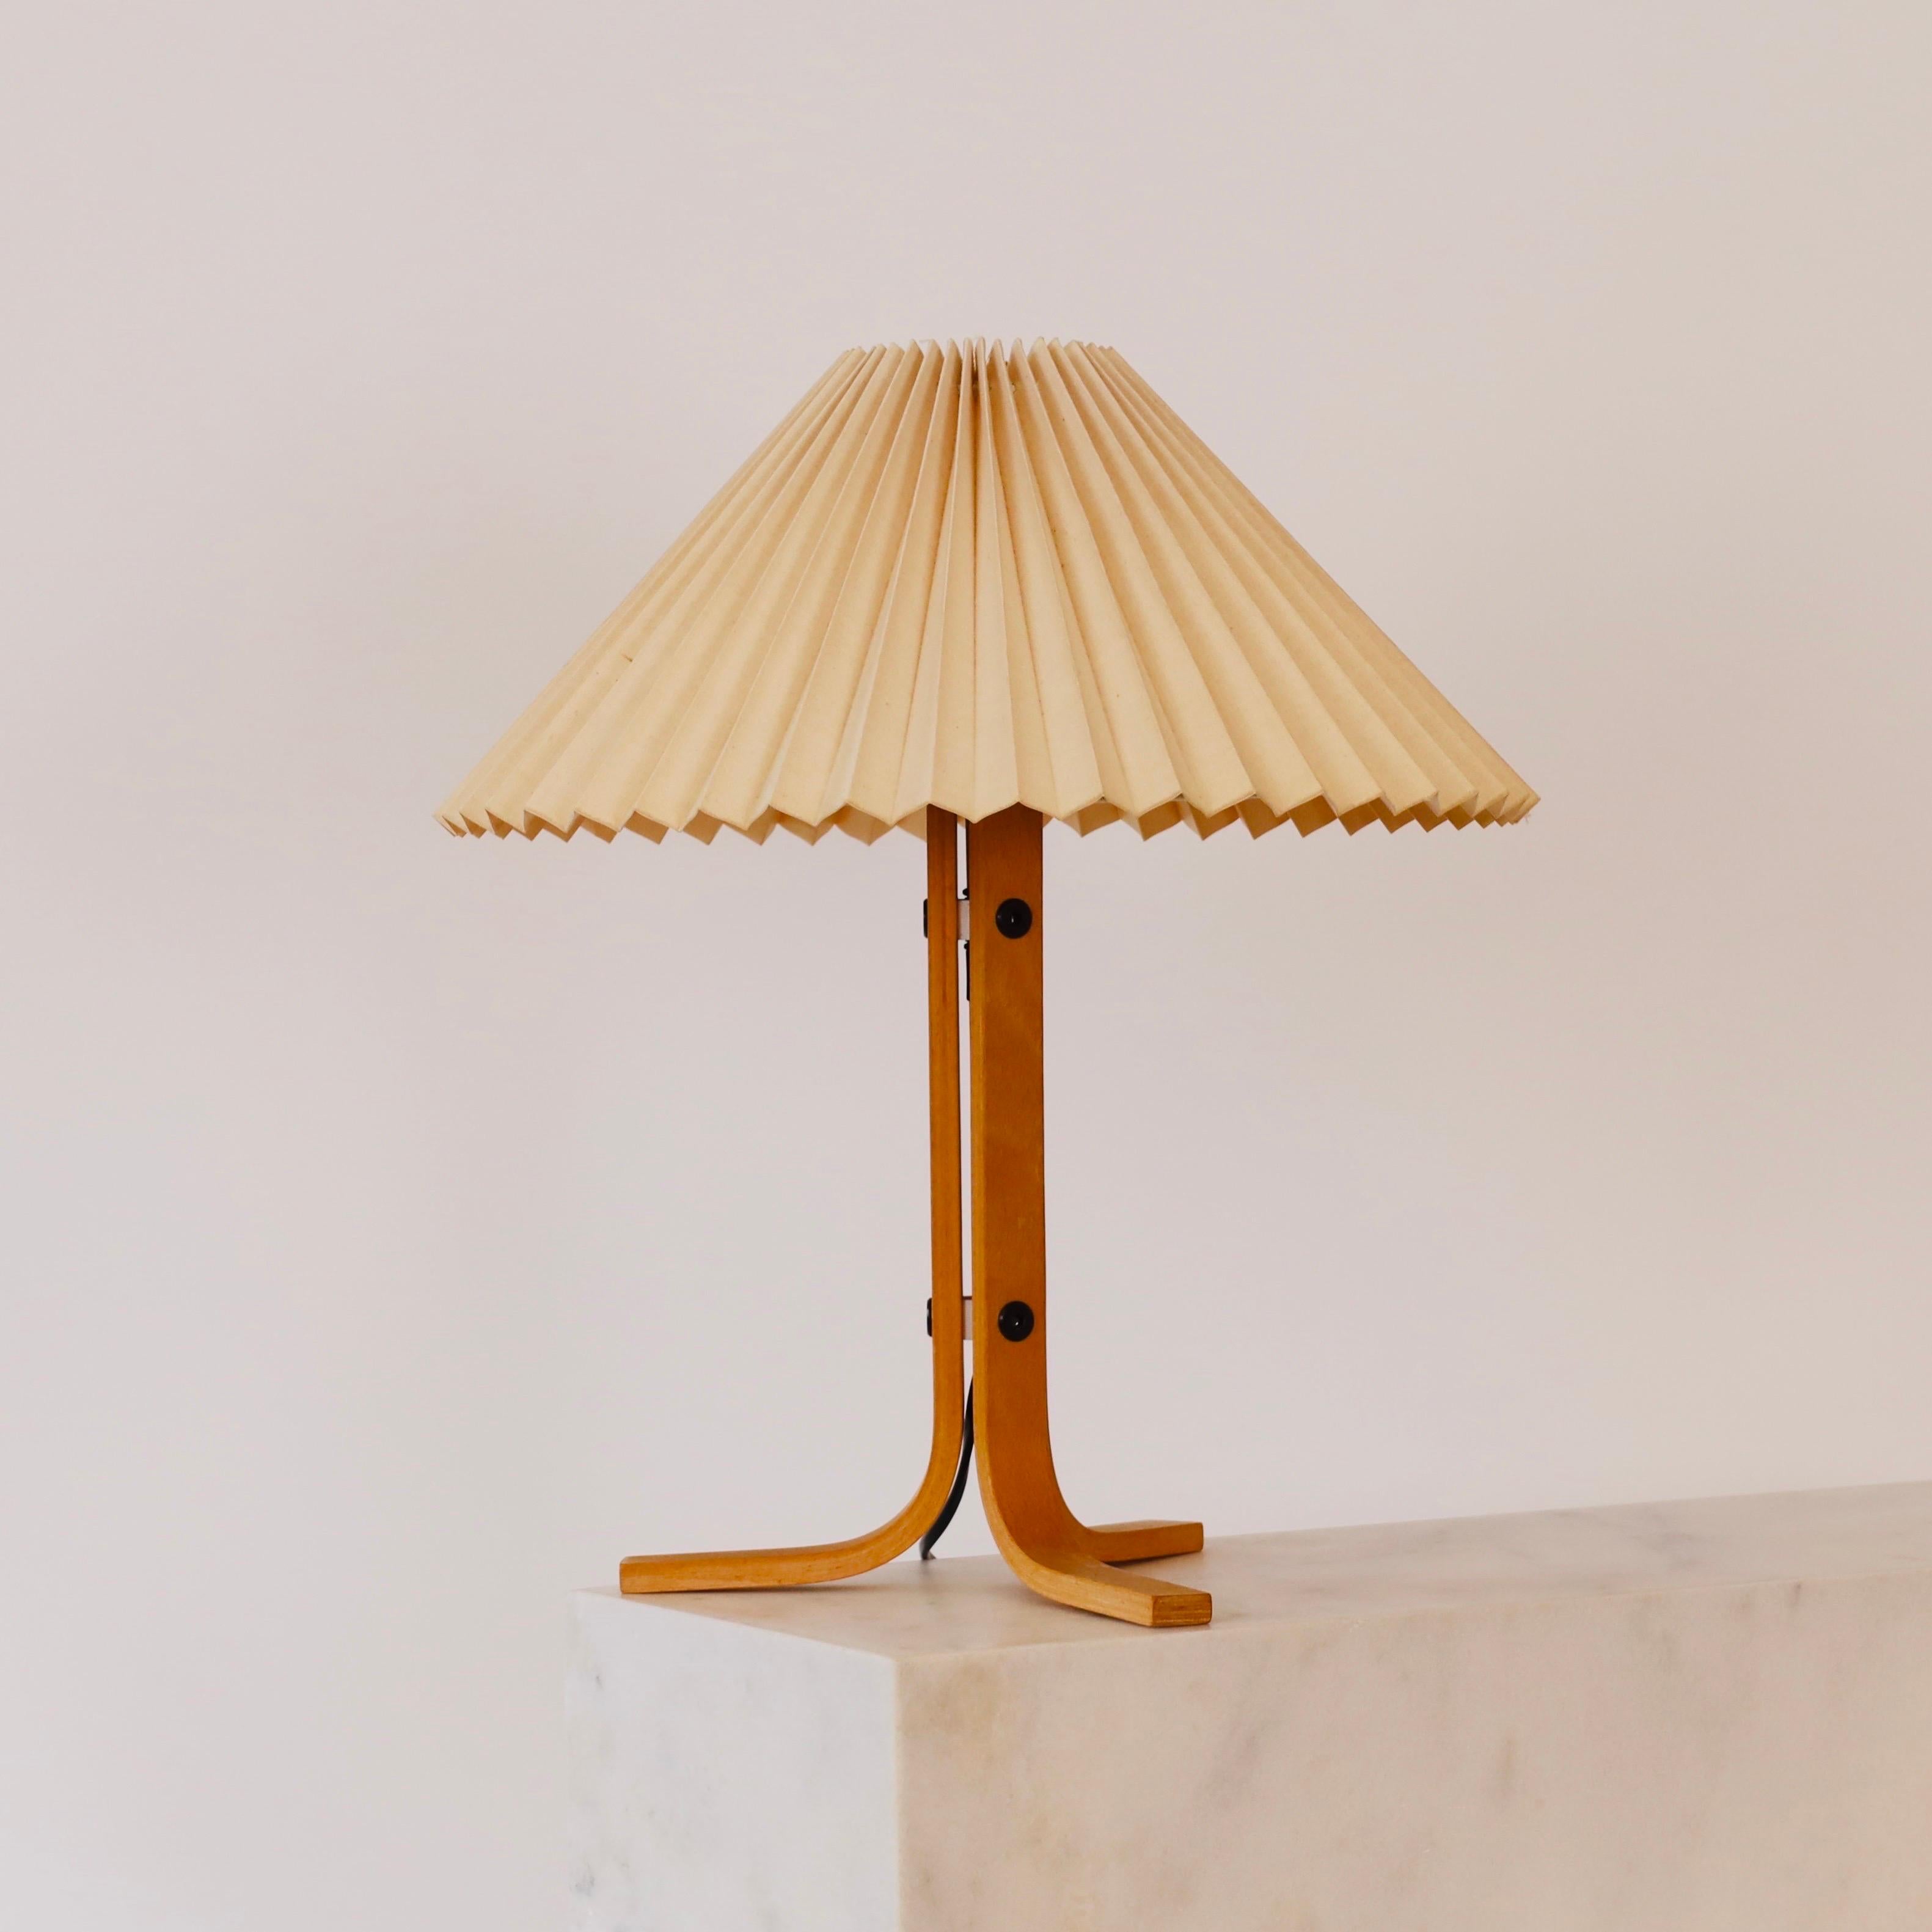 A beech wood tripod desk lamp designed by Mads Caprani in the 1970s for Caprani Light. A rare find for a beautiful home.

* A  tripod desk lamp in bend beech veneer with a pleated light beige fabric shade
* Designer: Mads Caprani
* Model: 223
*